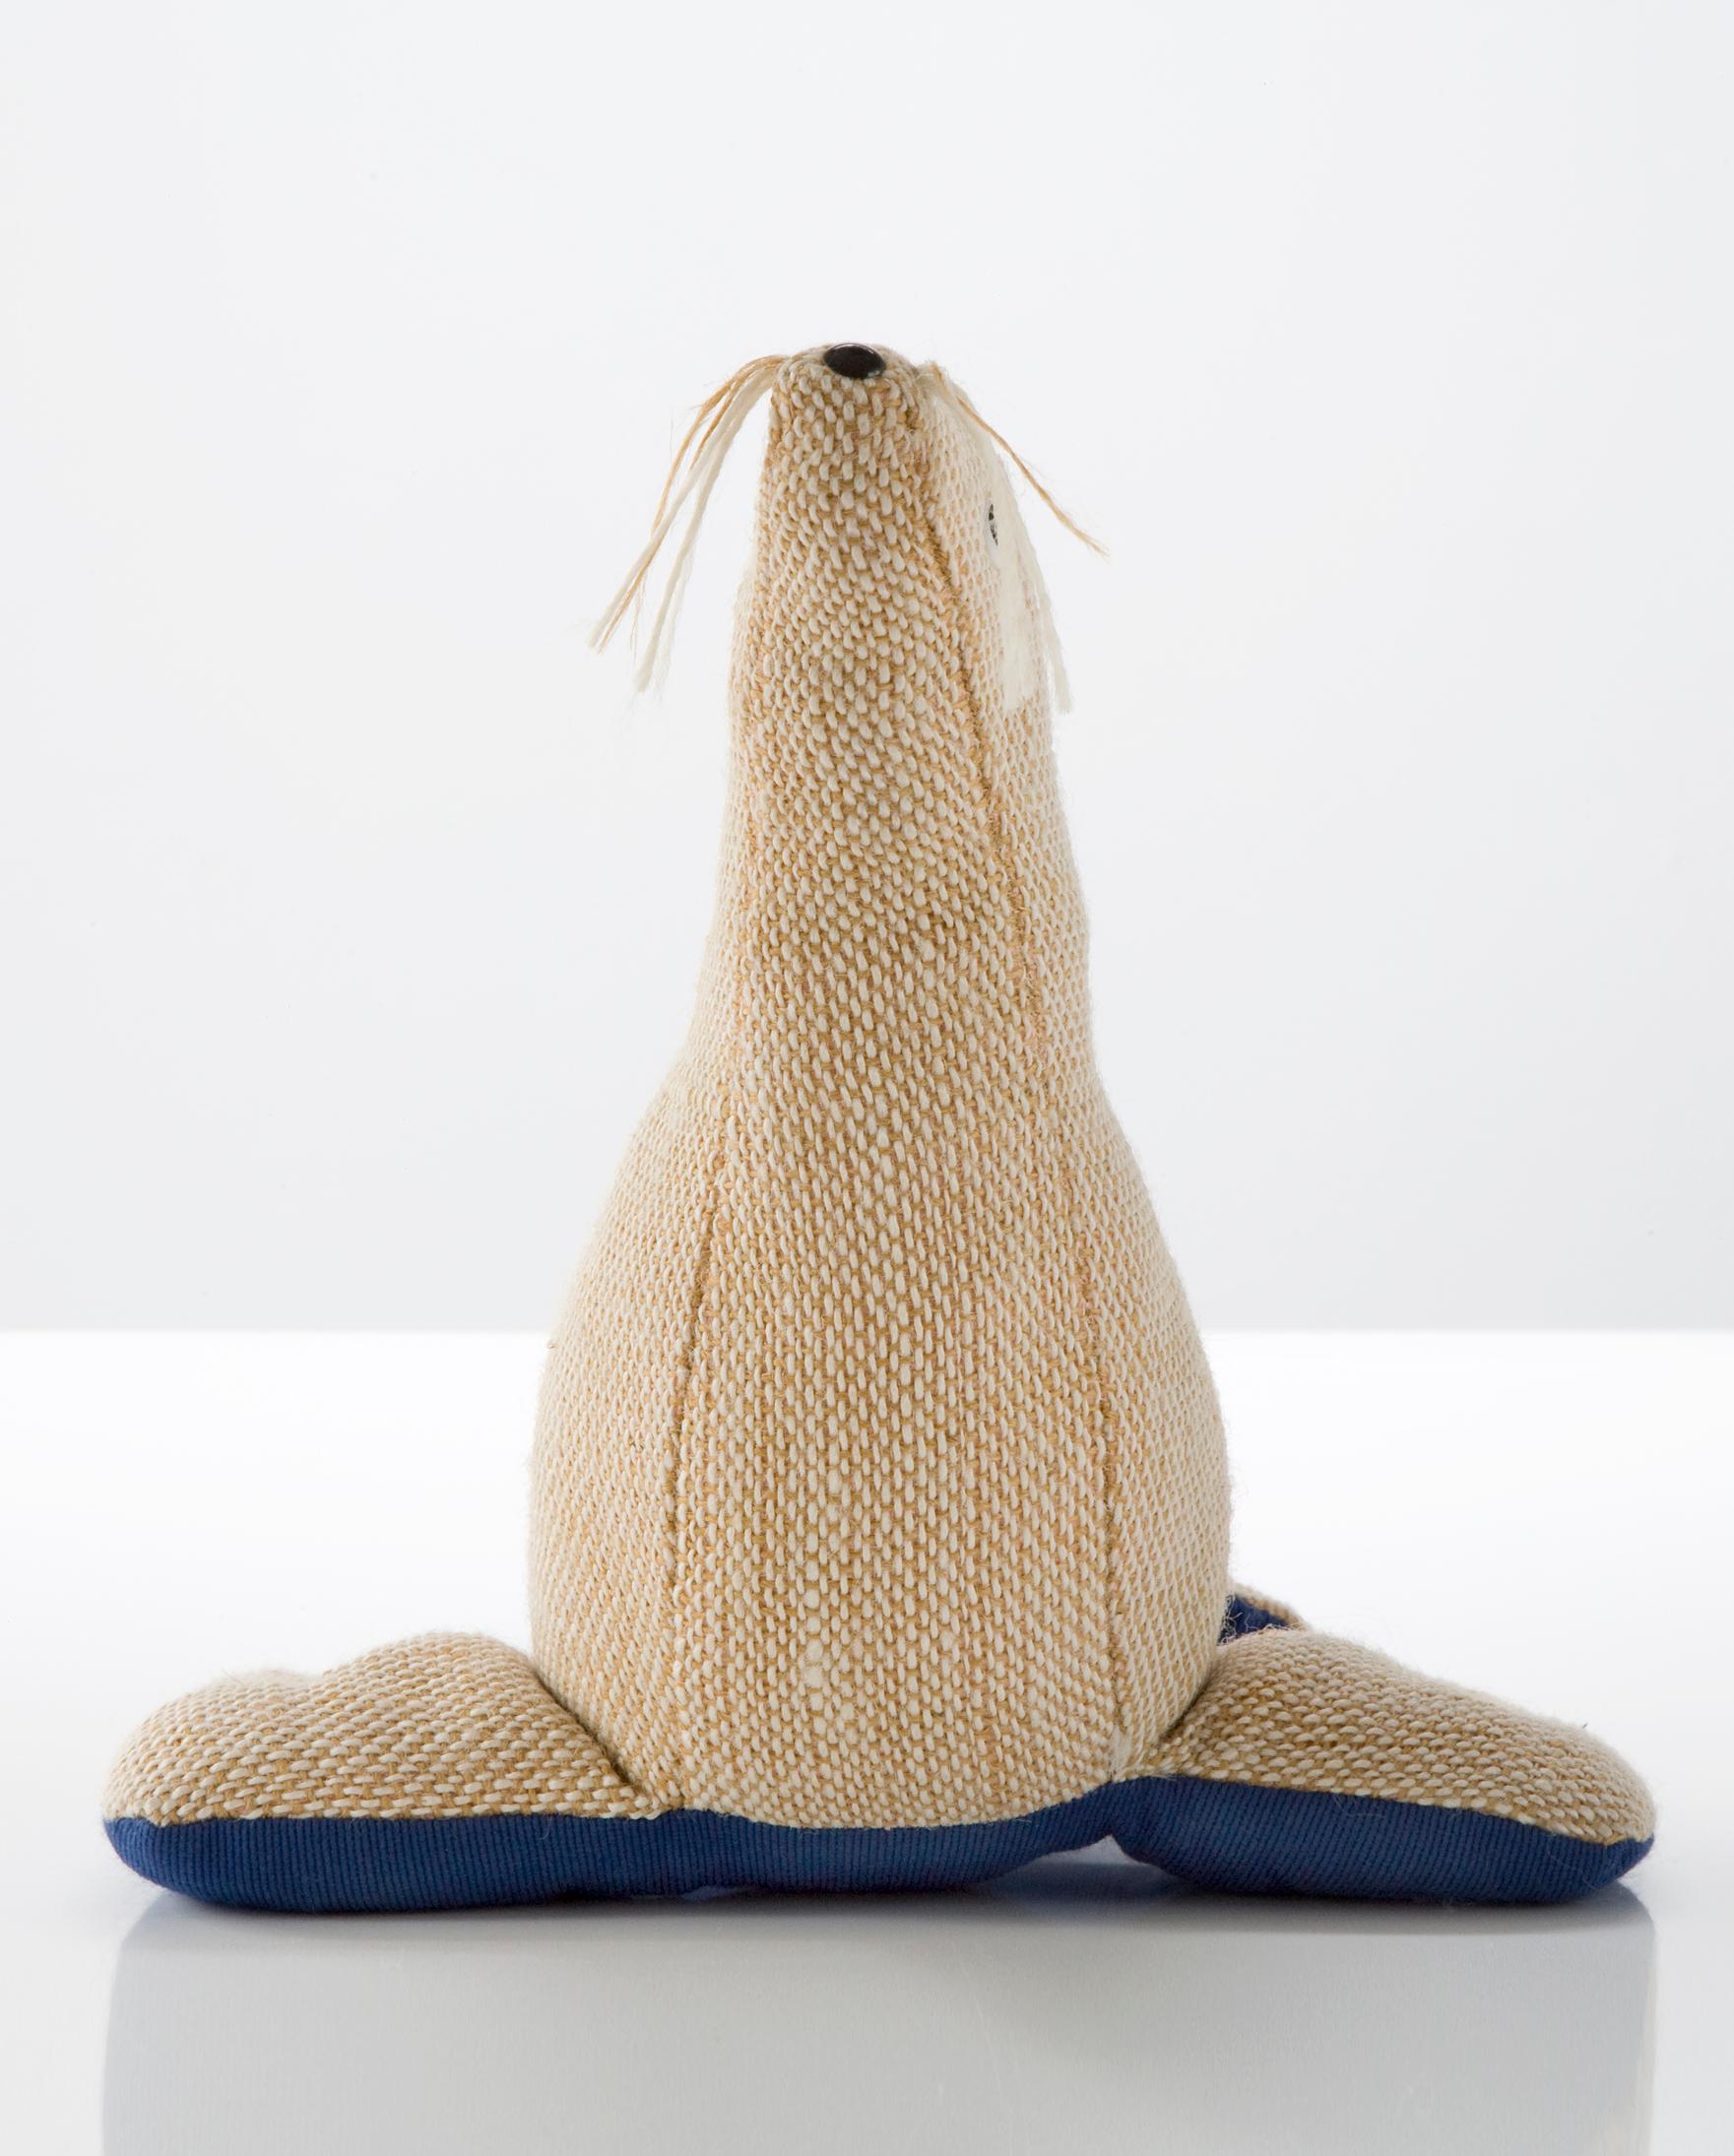 German Therapeutic Toy Seal in Jute with Leather by Renate Müller, 1965-1971